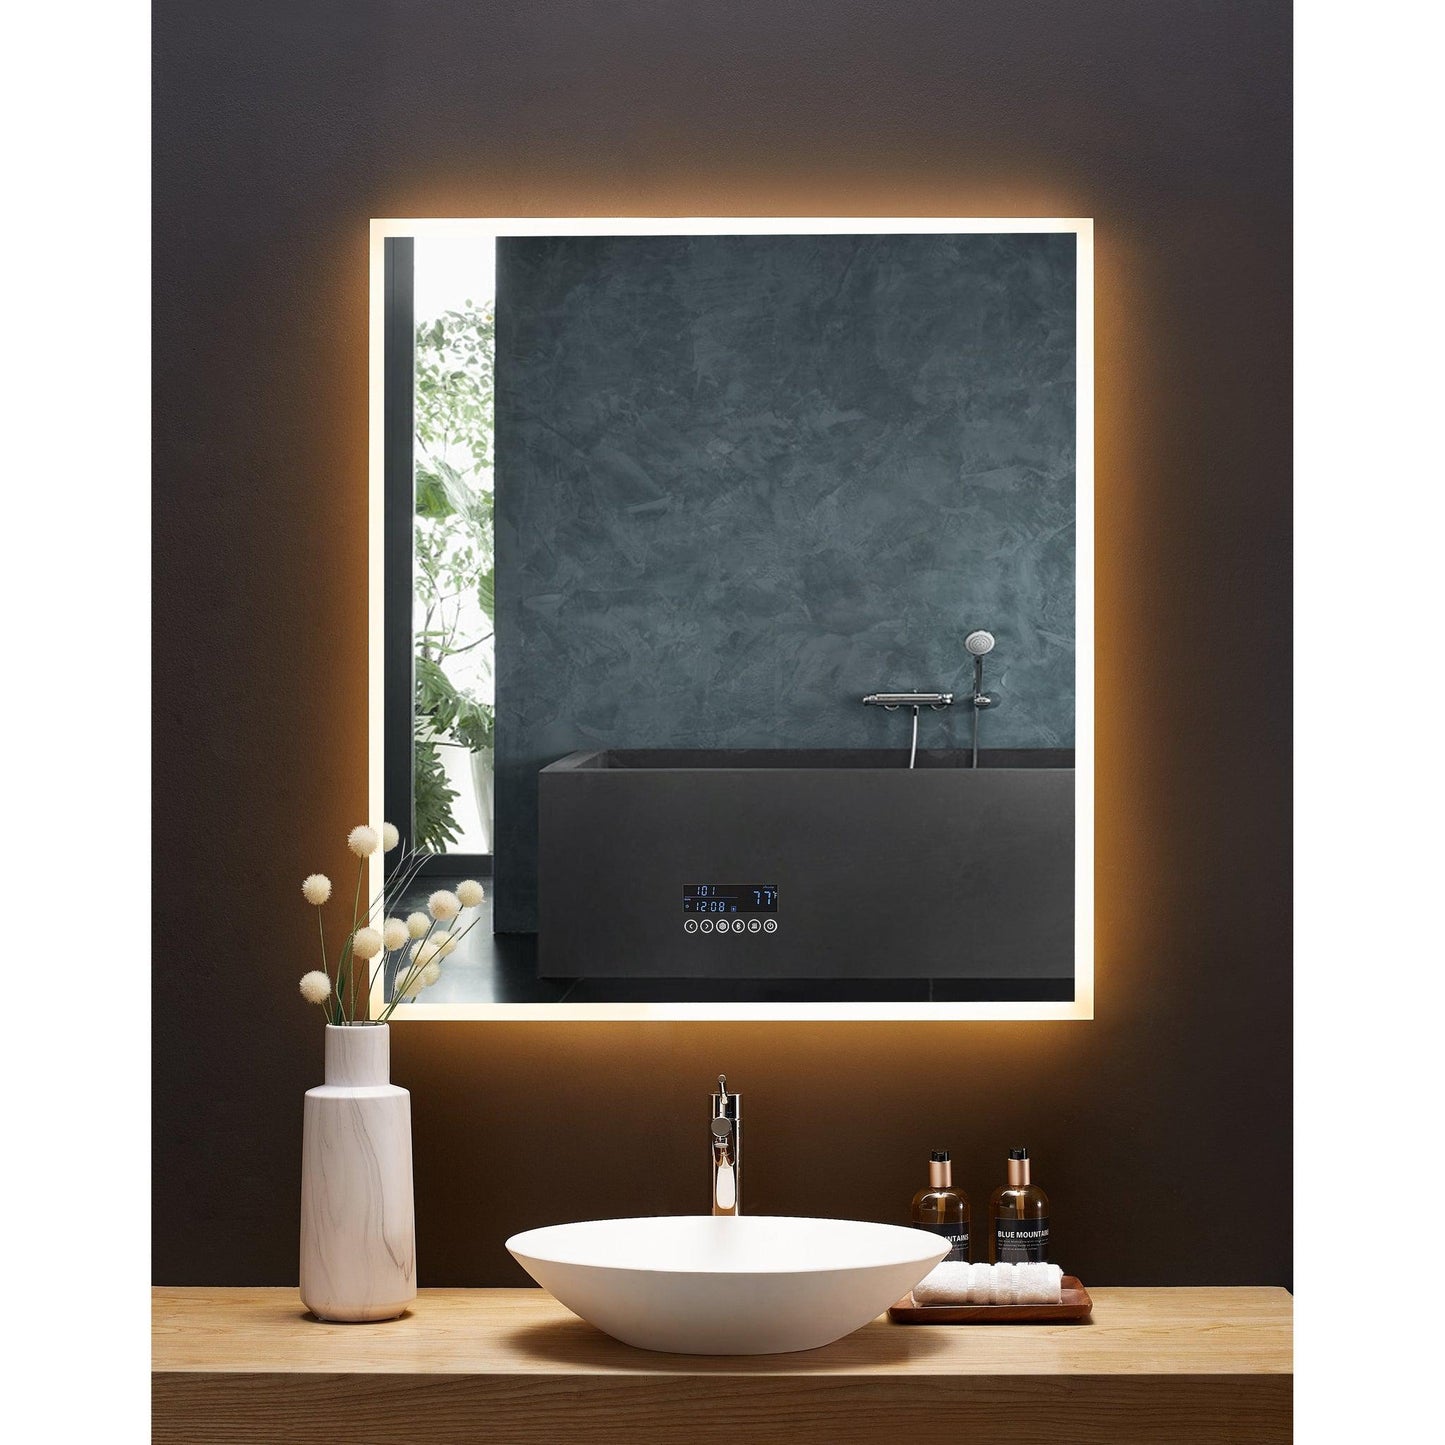 Ancerre Designs Immersion 36" x 40" Modern Rectangle LED Lighted Frameless Bathroom Vanity Mirror With Bluetooth, Defogger, Digital Display and Mounting Hardware